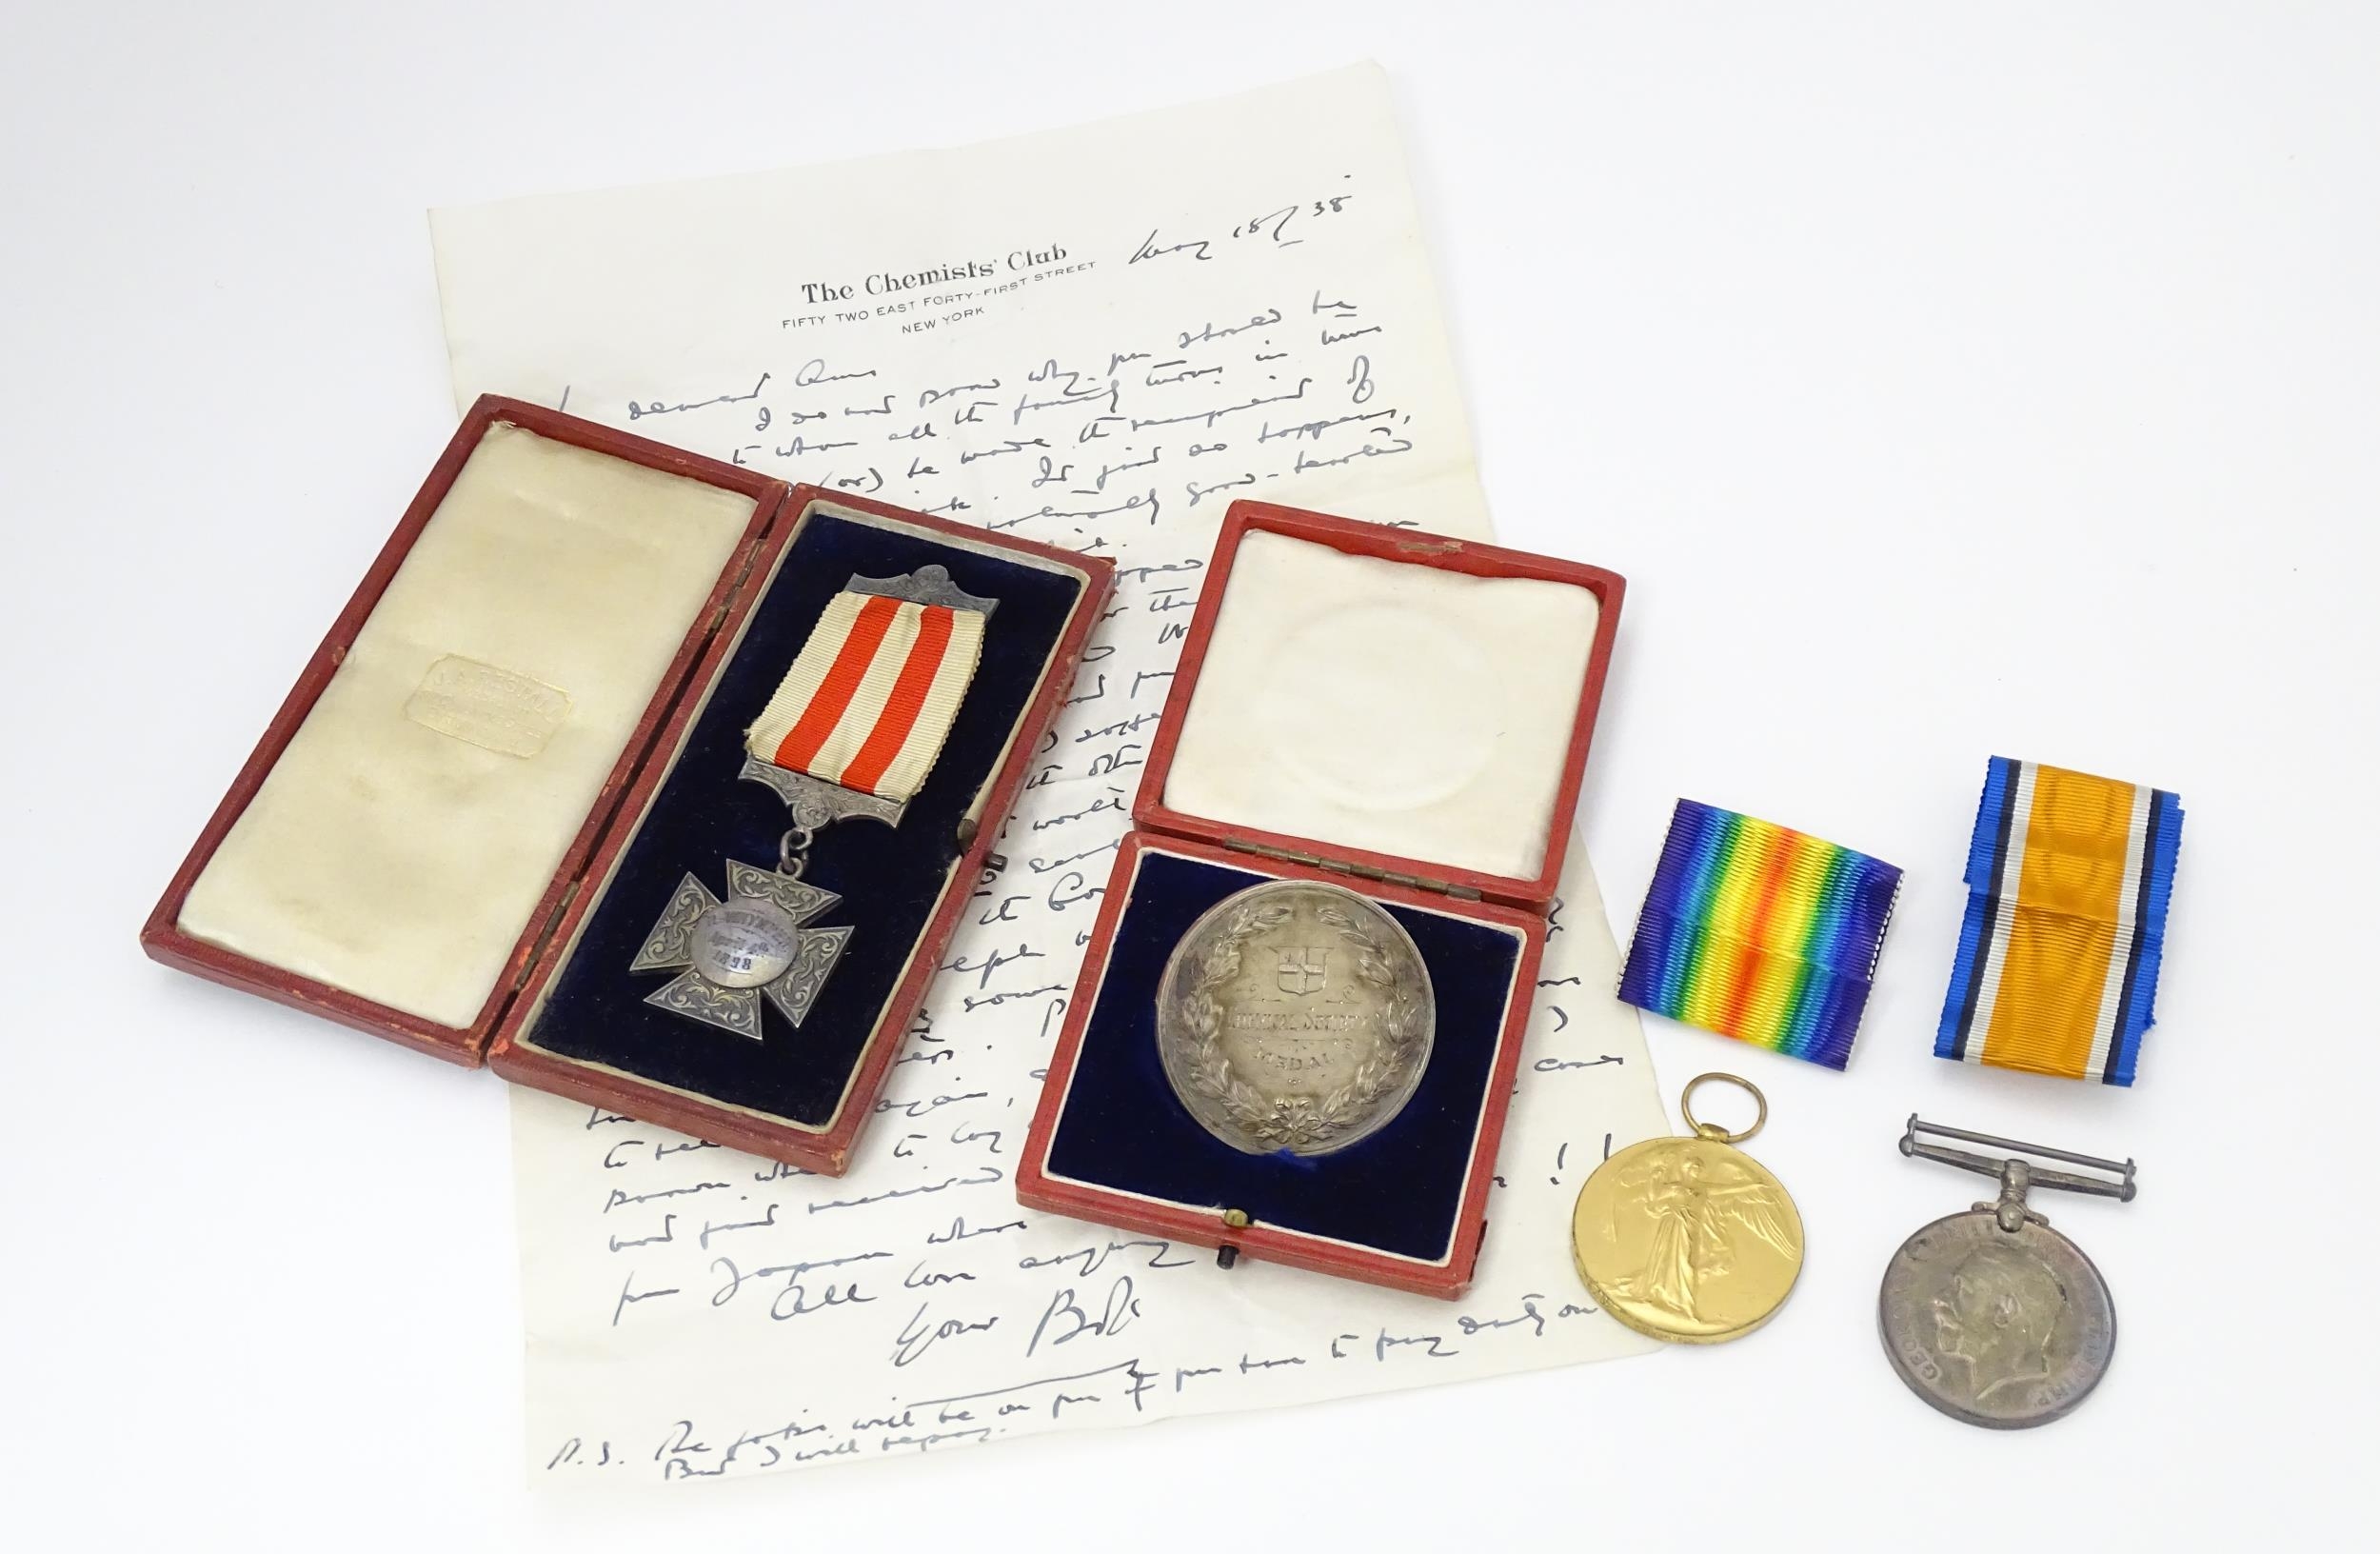 Militaria: two WWI campaign medals awarded to the author Robert Whymper (Captain, East Surrey